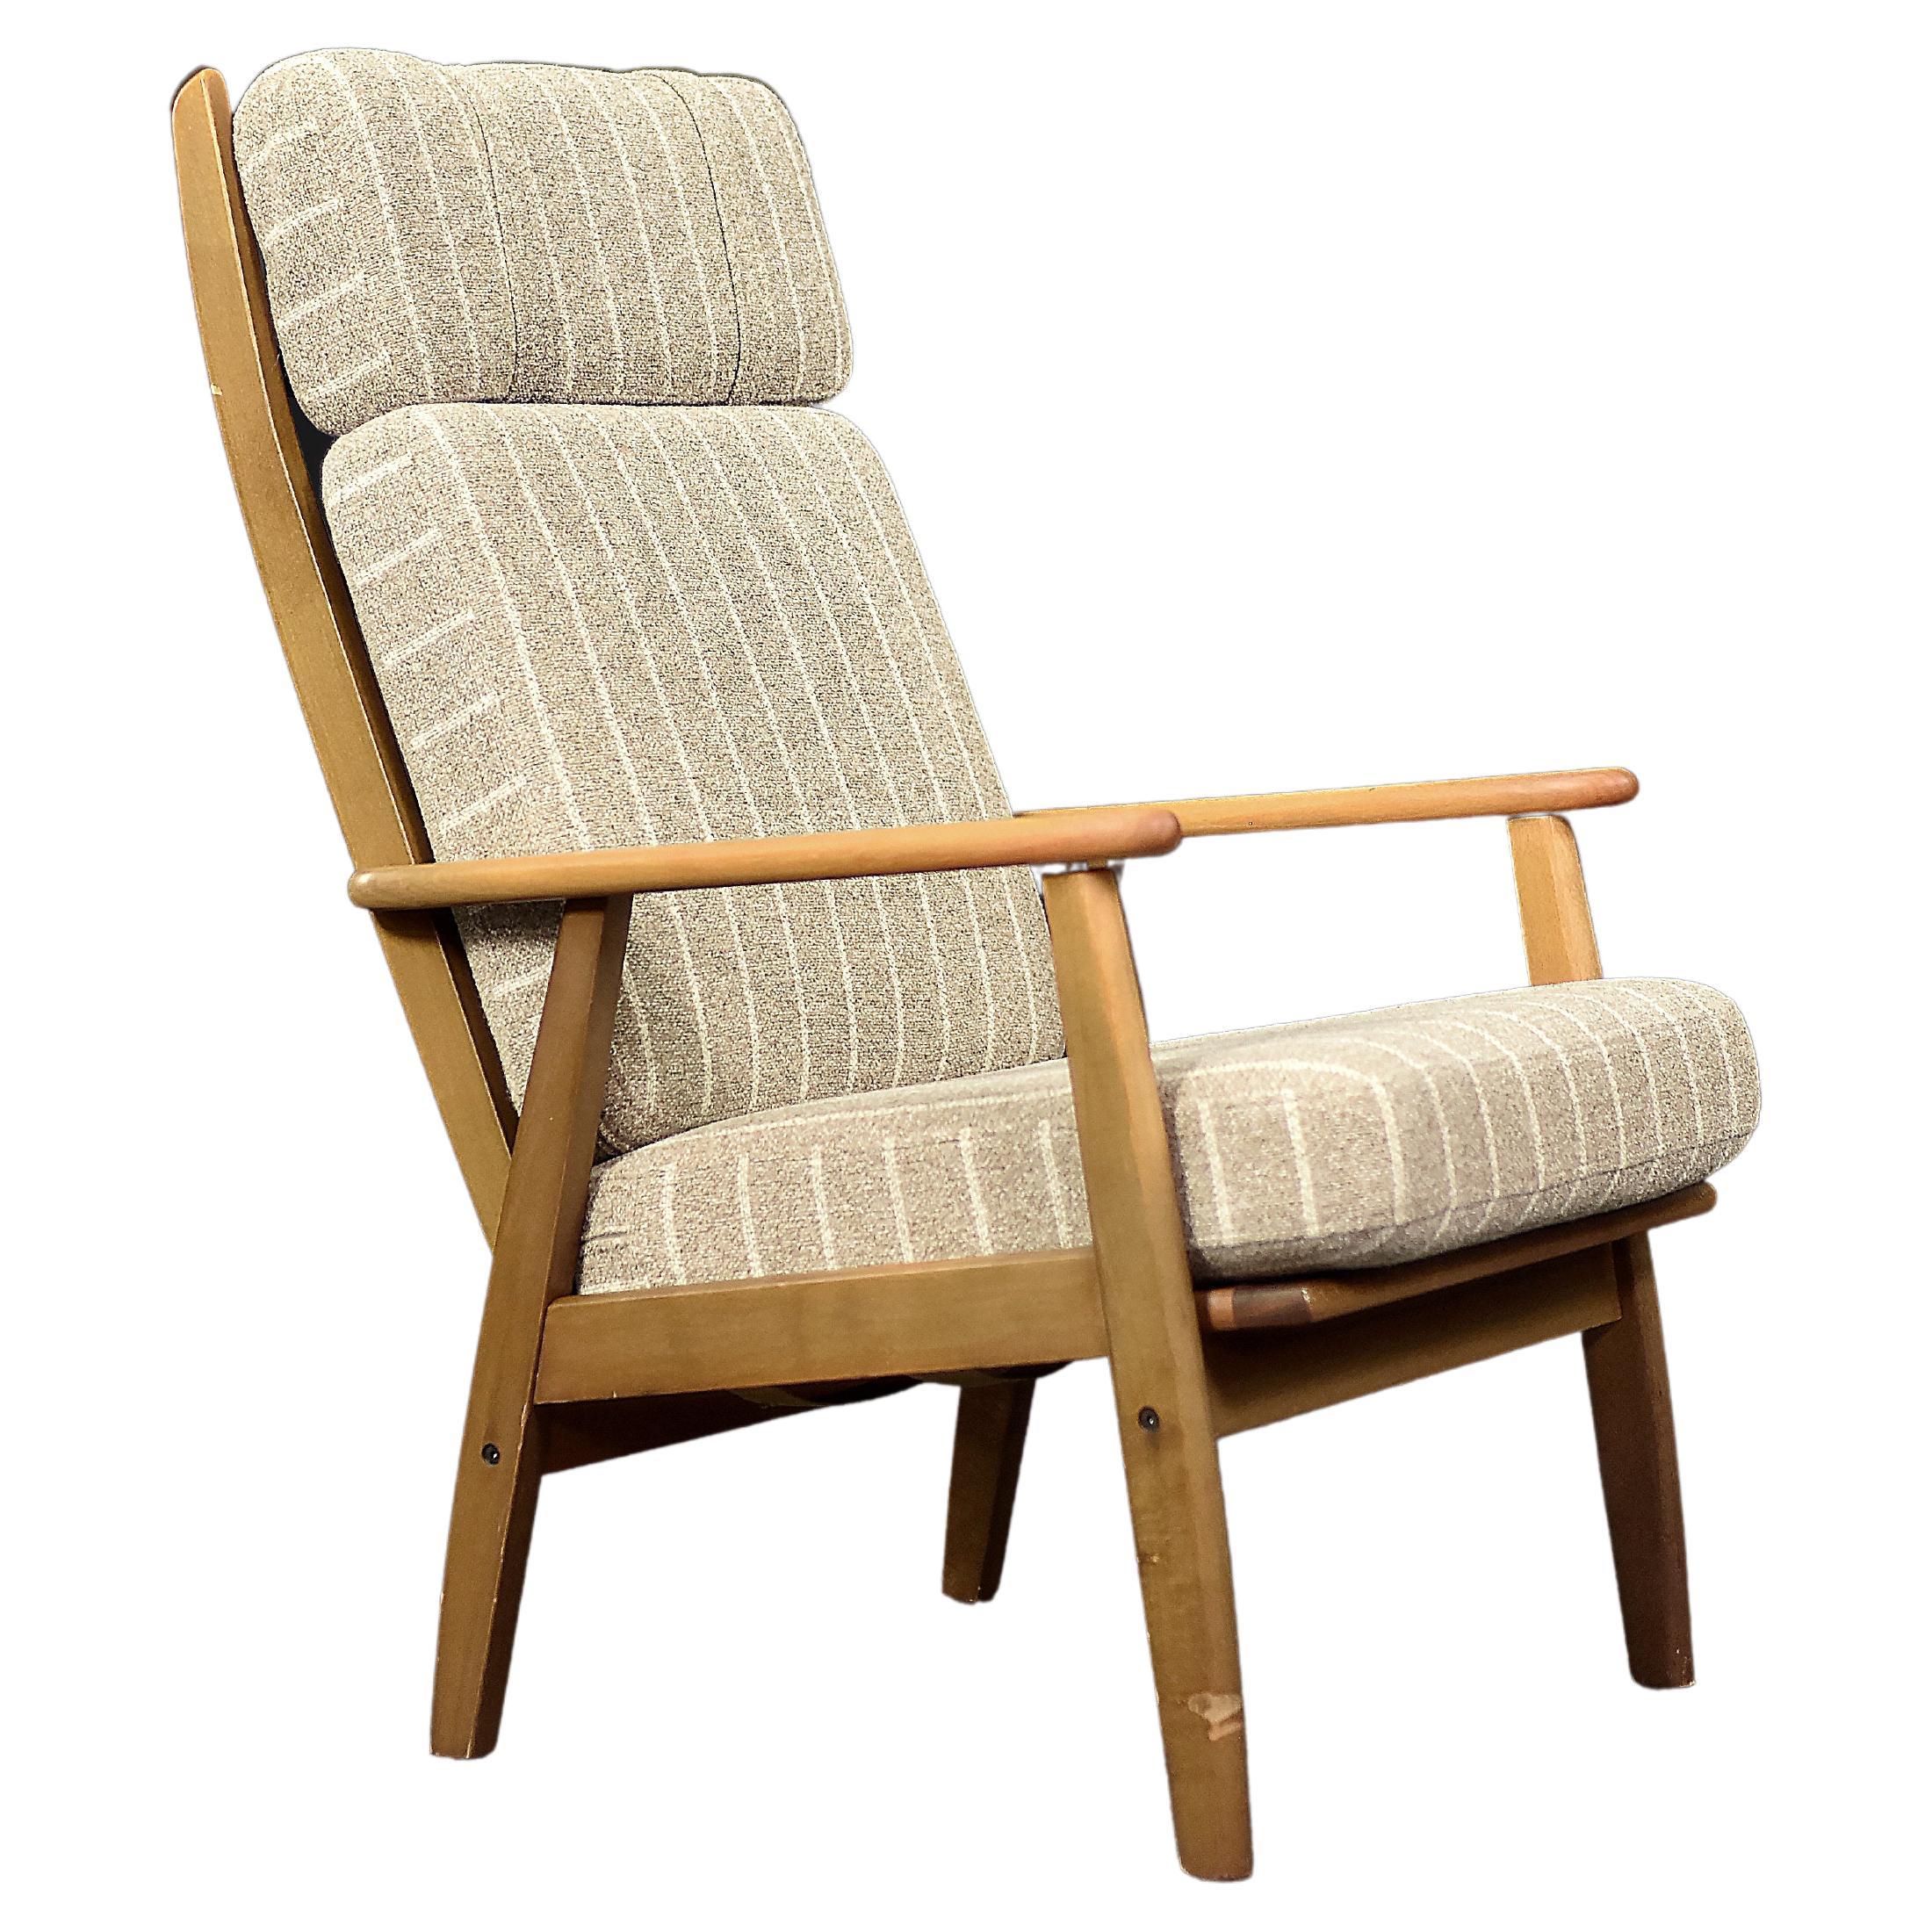 Vintage Midcentury Danish Modern Wood & Beige Fabric Lounge Chair from Durup For Sale